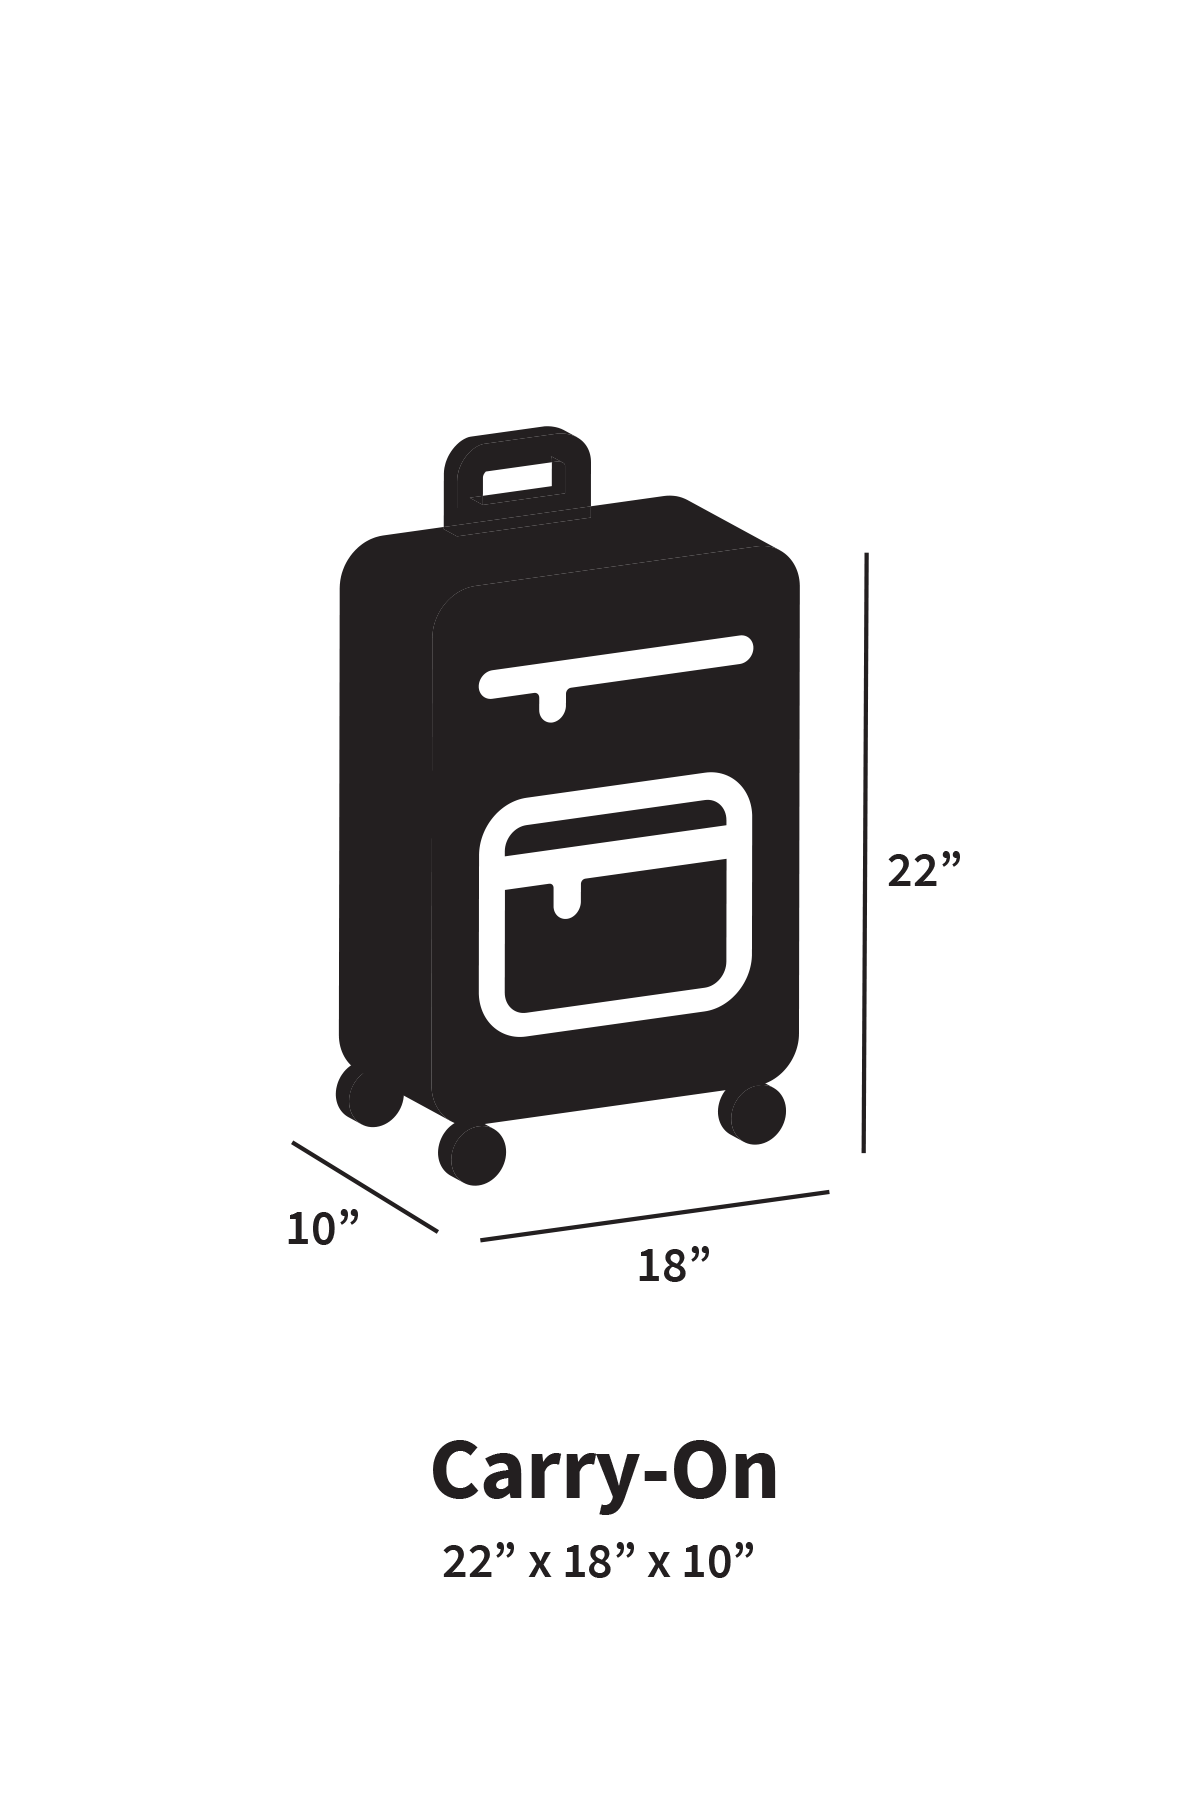 size of carry on bag spirit airlines